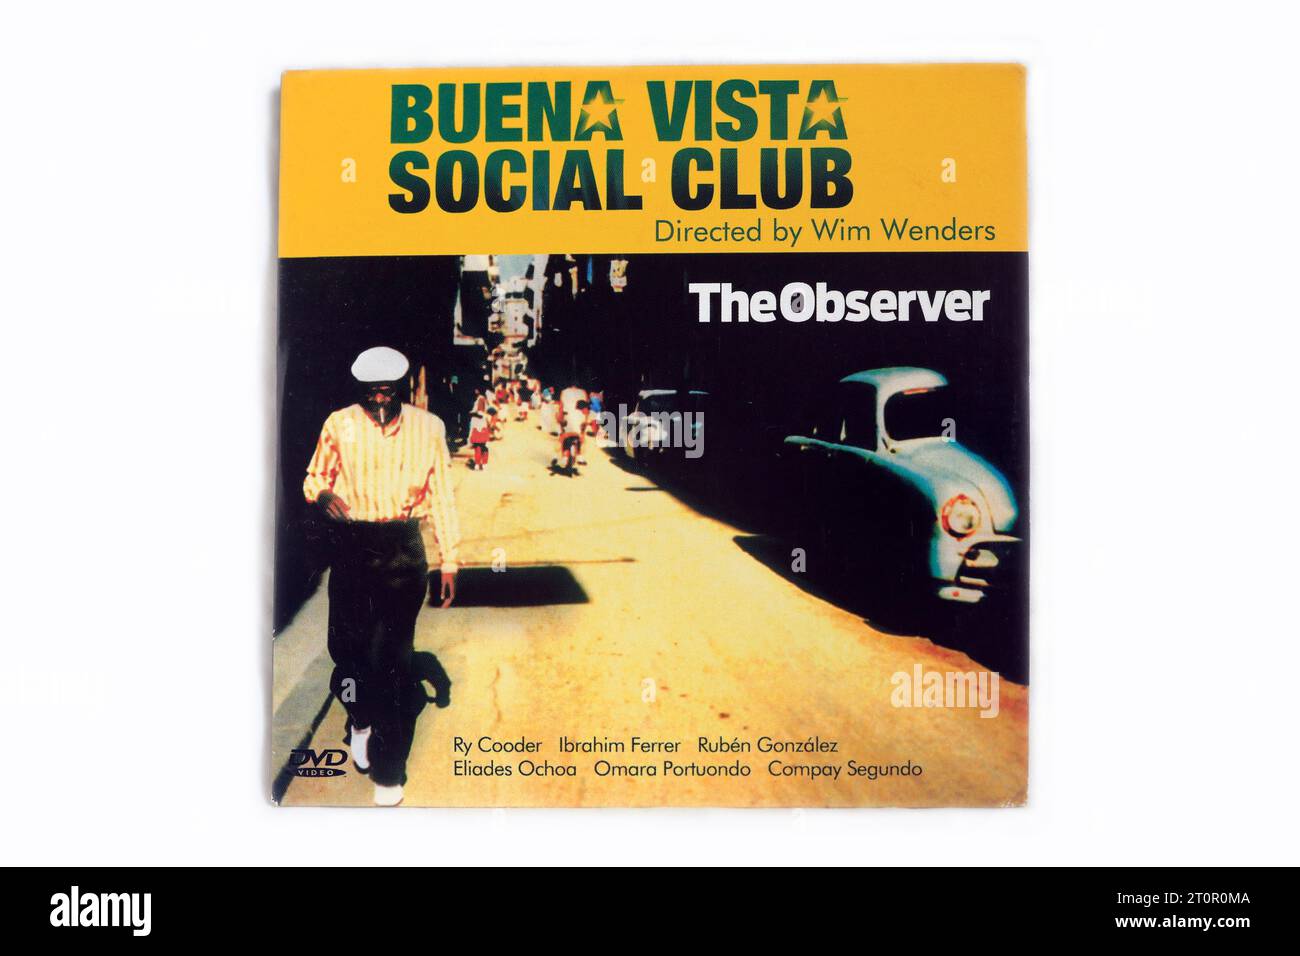 Buena Vista Social Club, directed by Wim Wenders DVD card cover, on light background Stock Photo